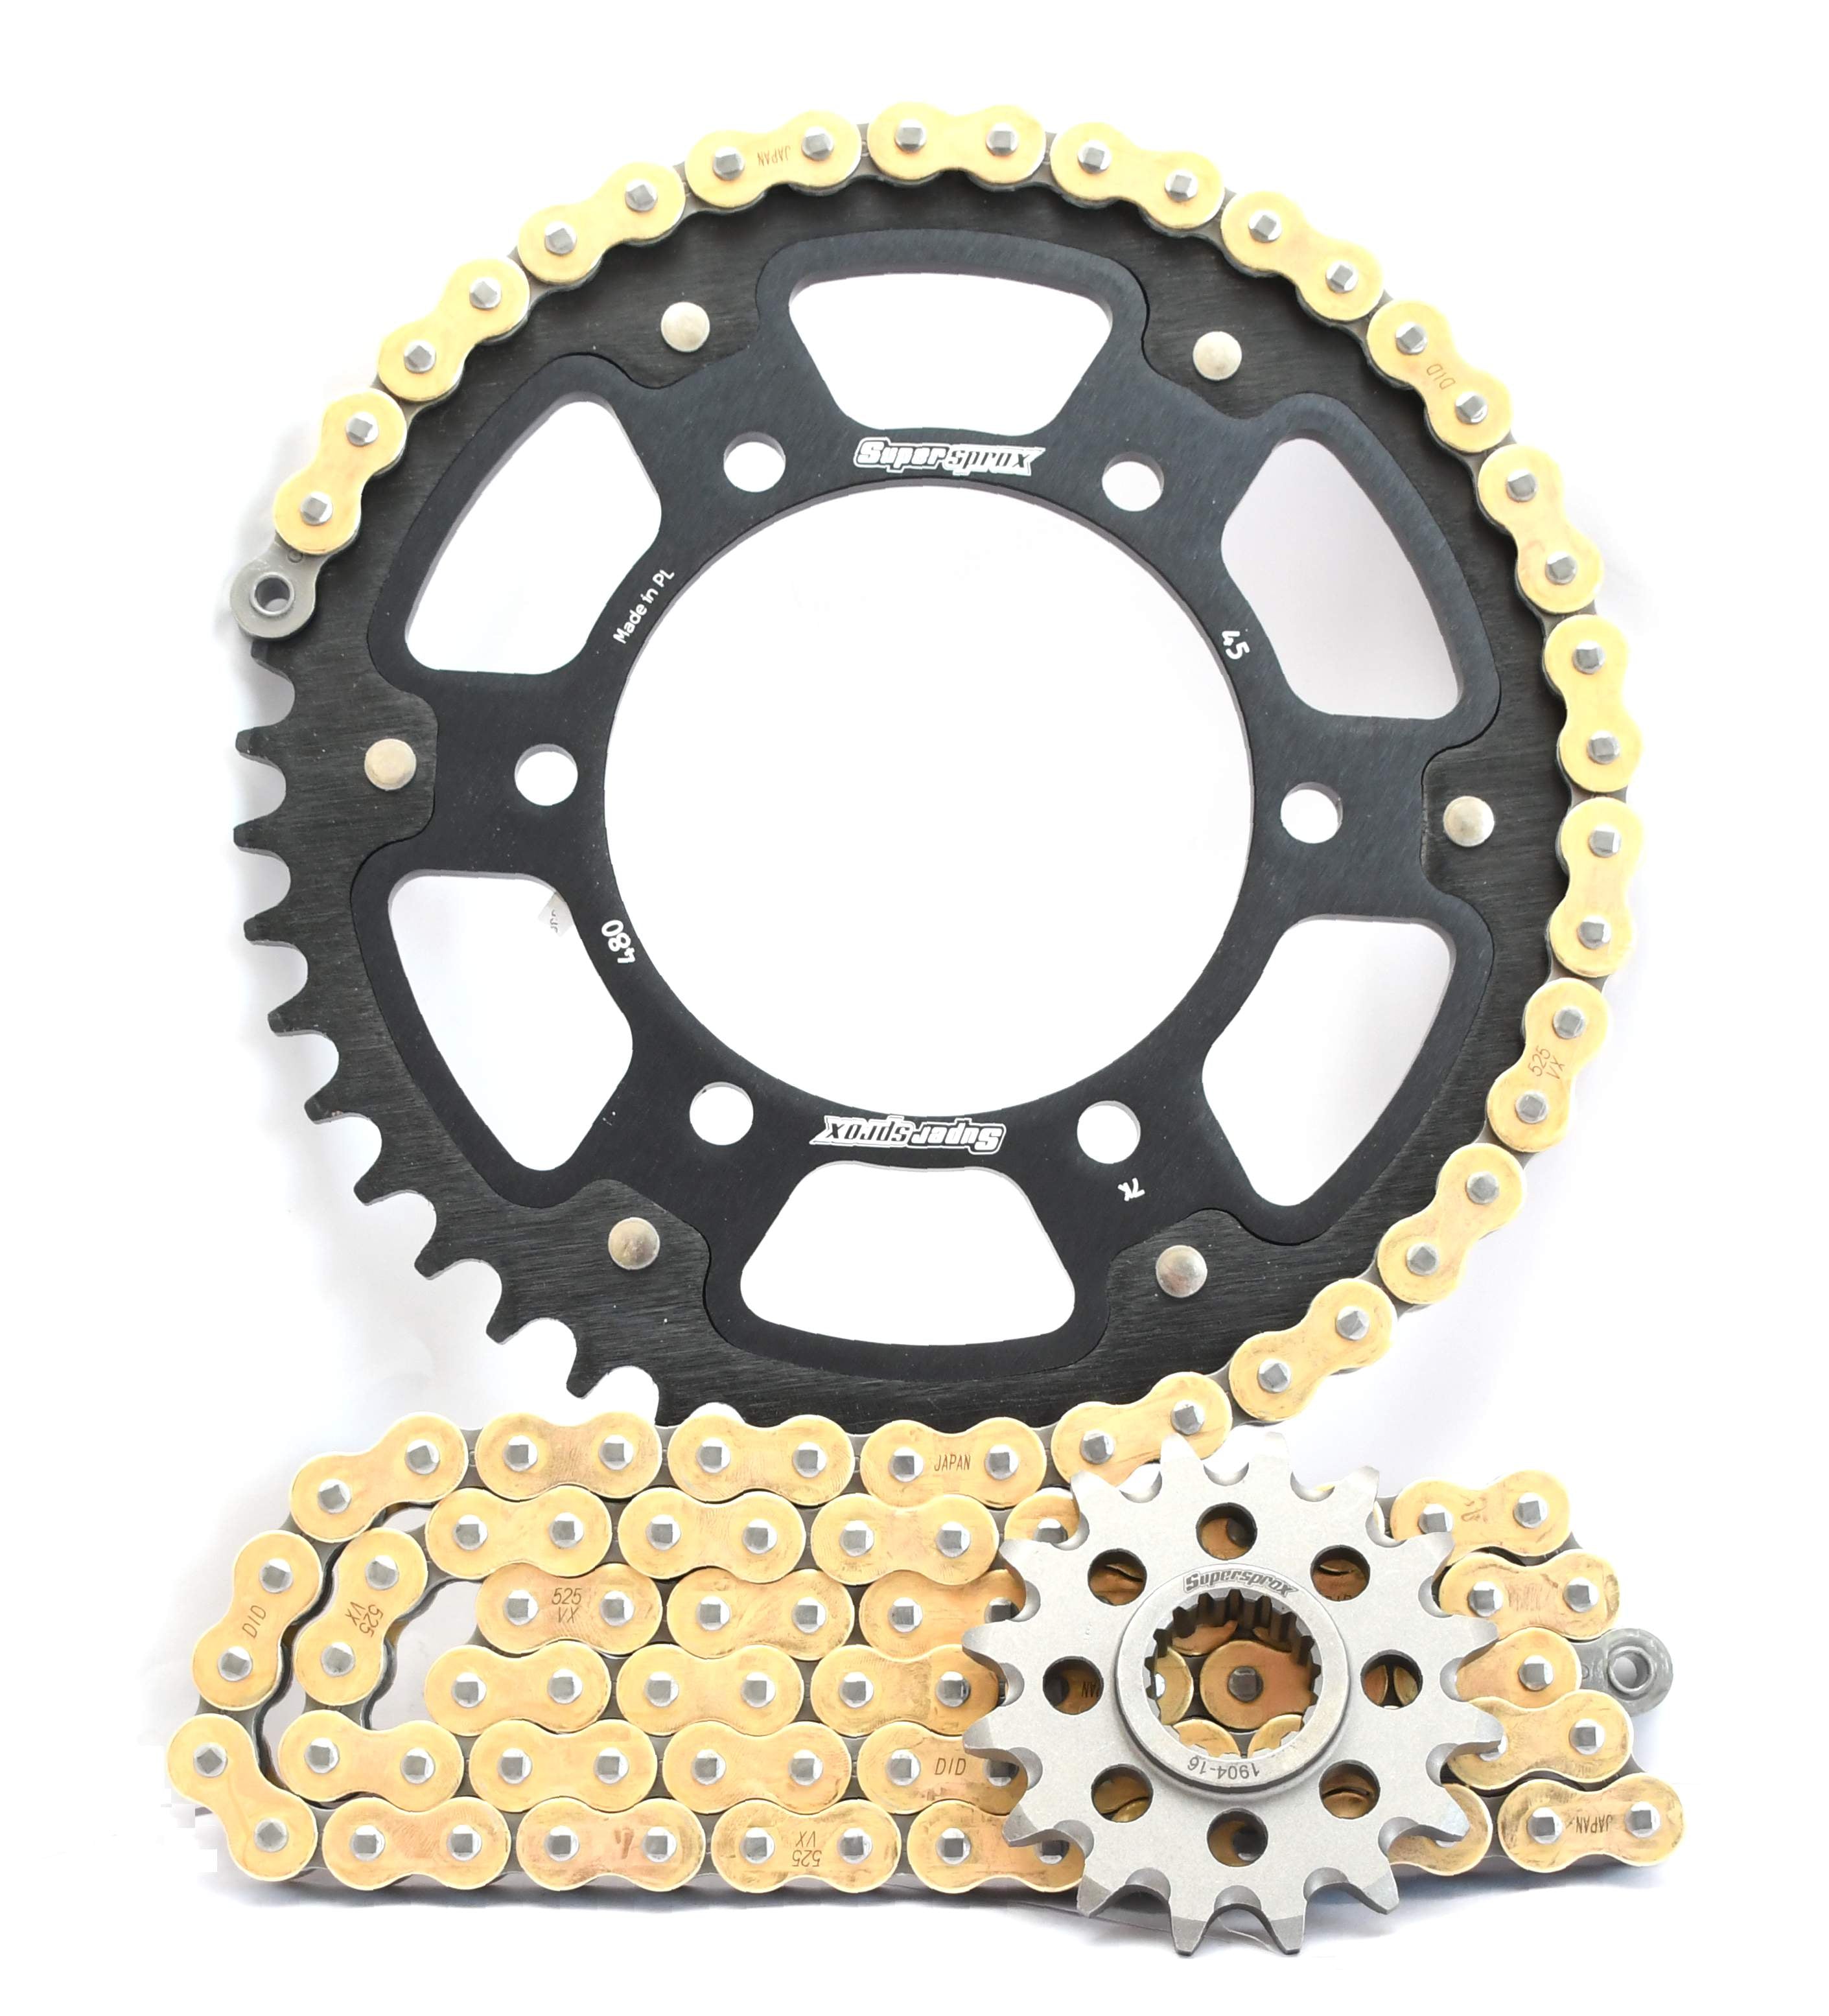 Supersprox Chain & Sprocket Kit for Yamaha YZF R1 2004-2005 - Standard Gearing